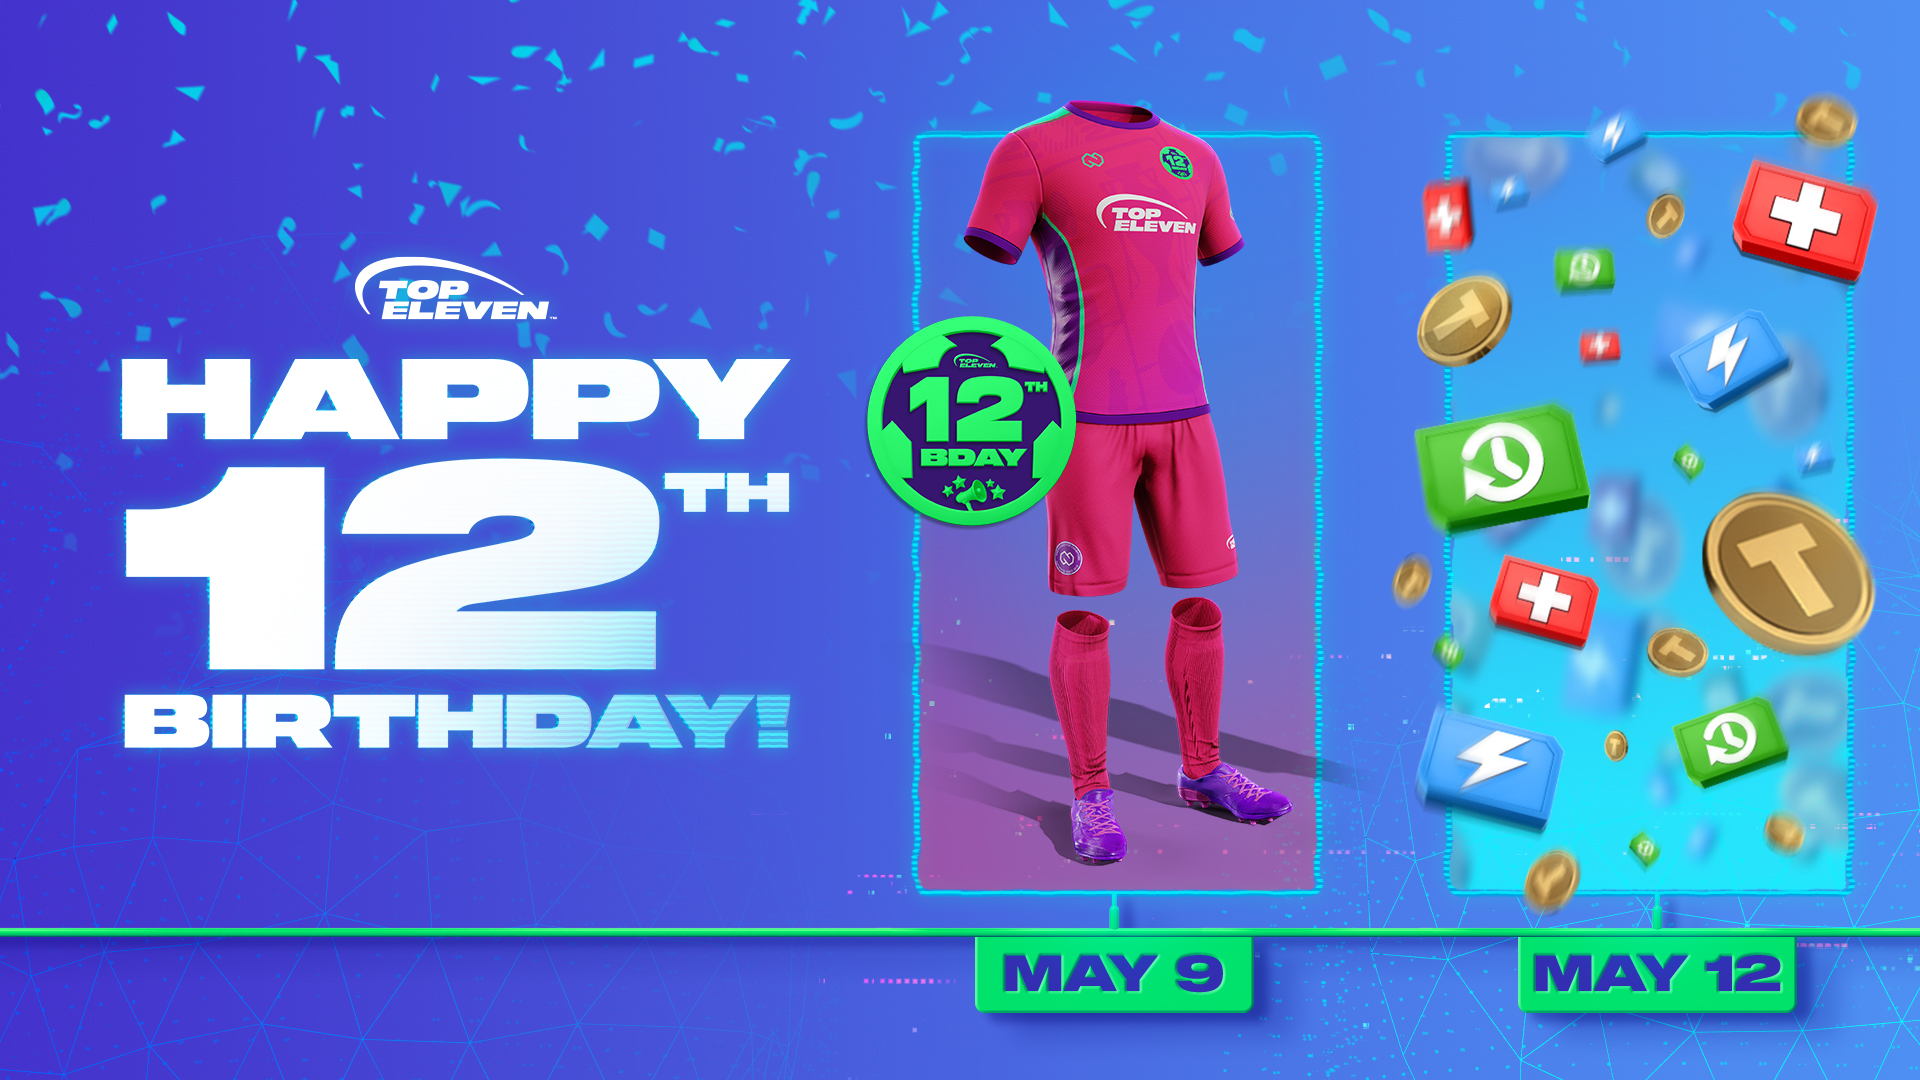 Top Eleven on Twitter: "🎈 #TopEleven has turned 12! 🎈 Grab your items 🎁 in the game and come back for another gift on May 12th! Thank you Managers for your